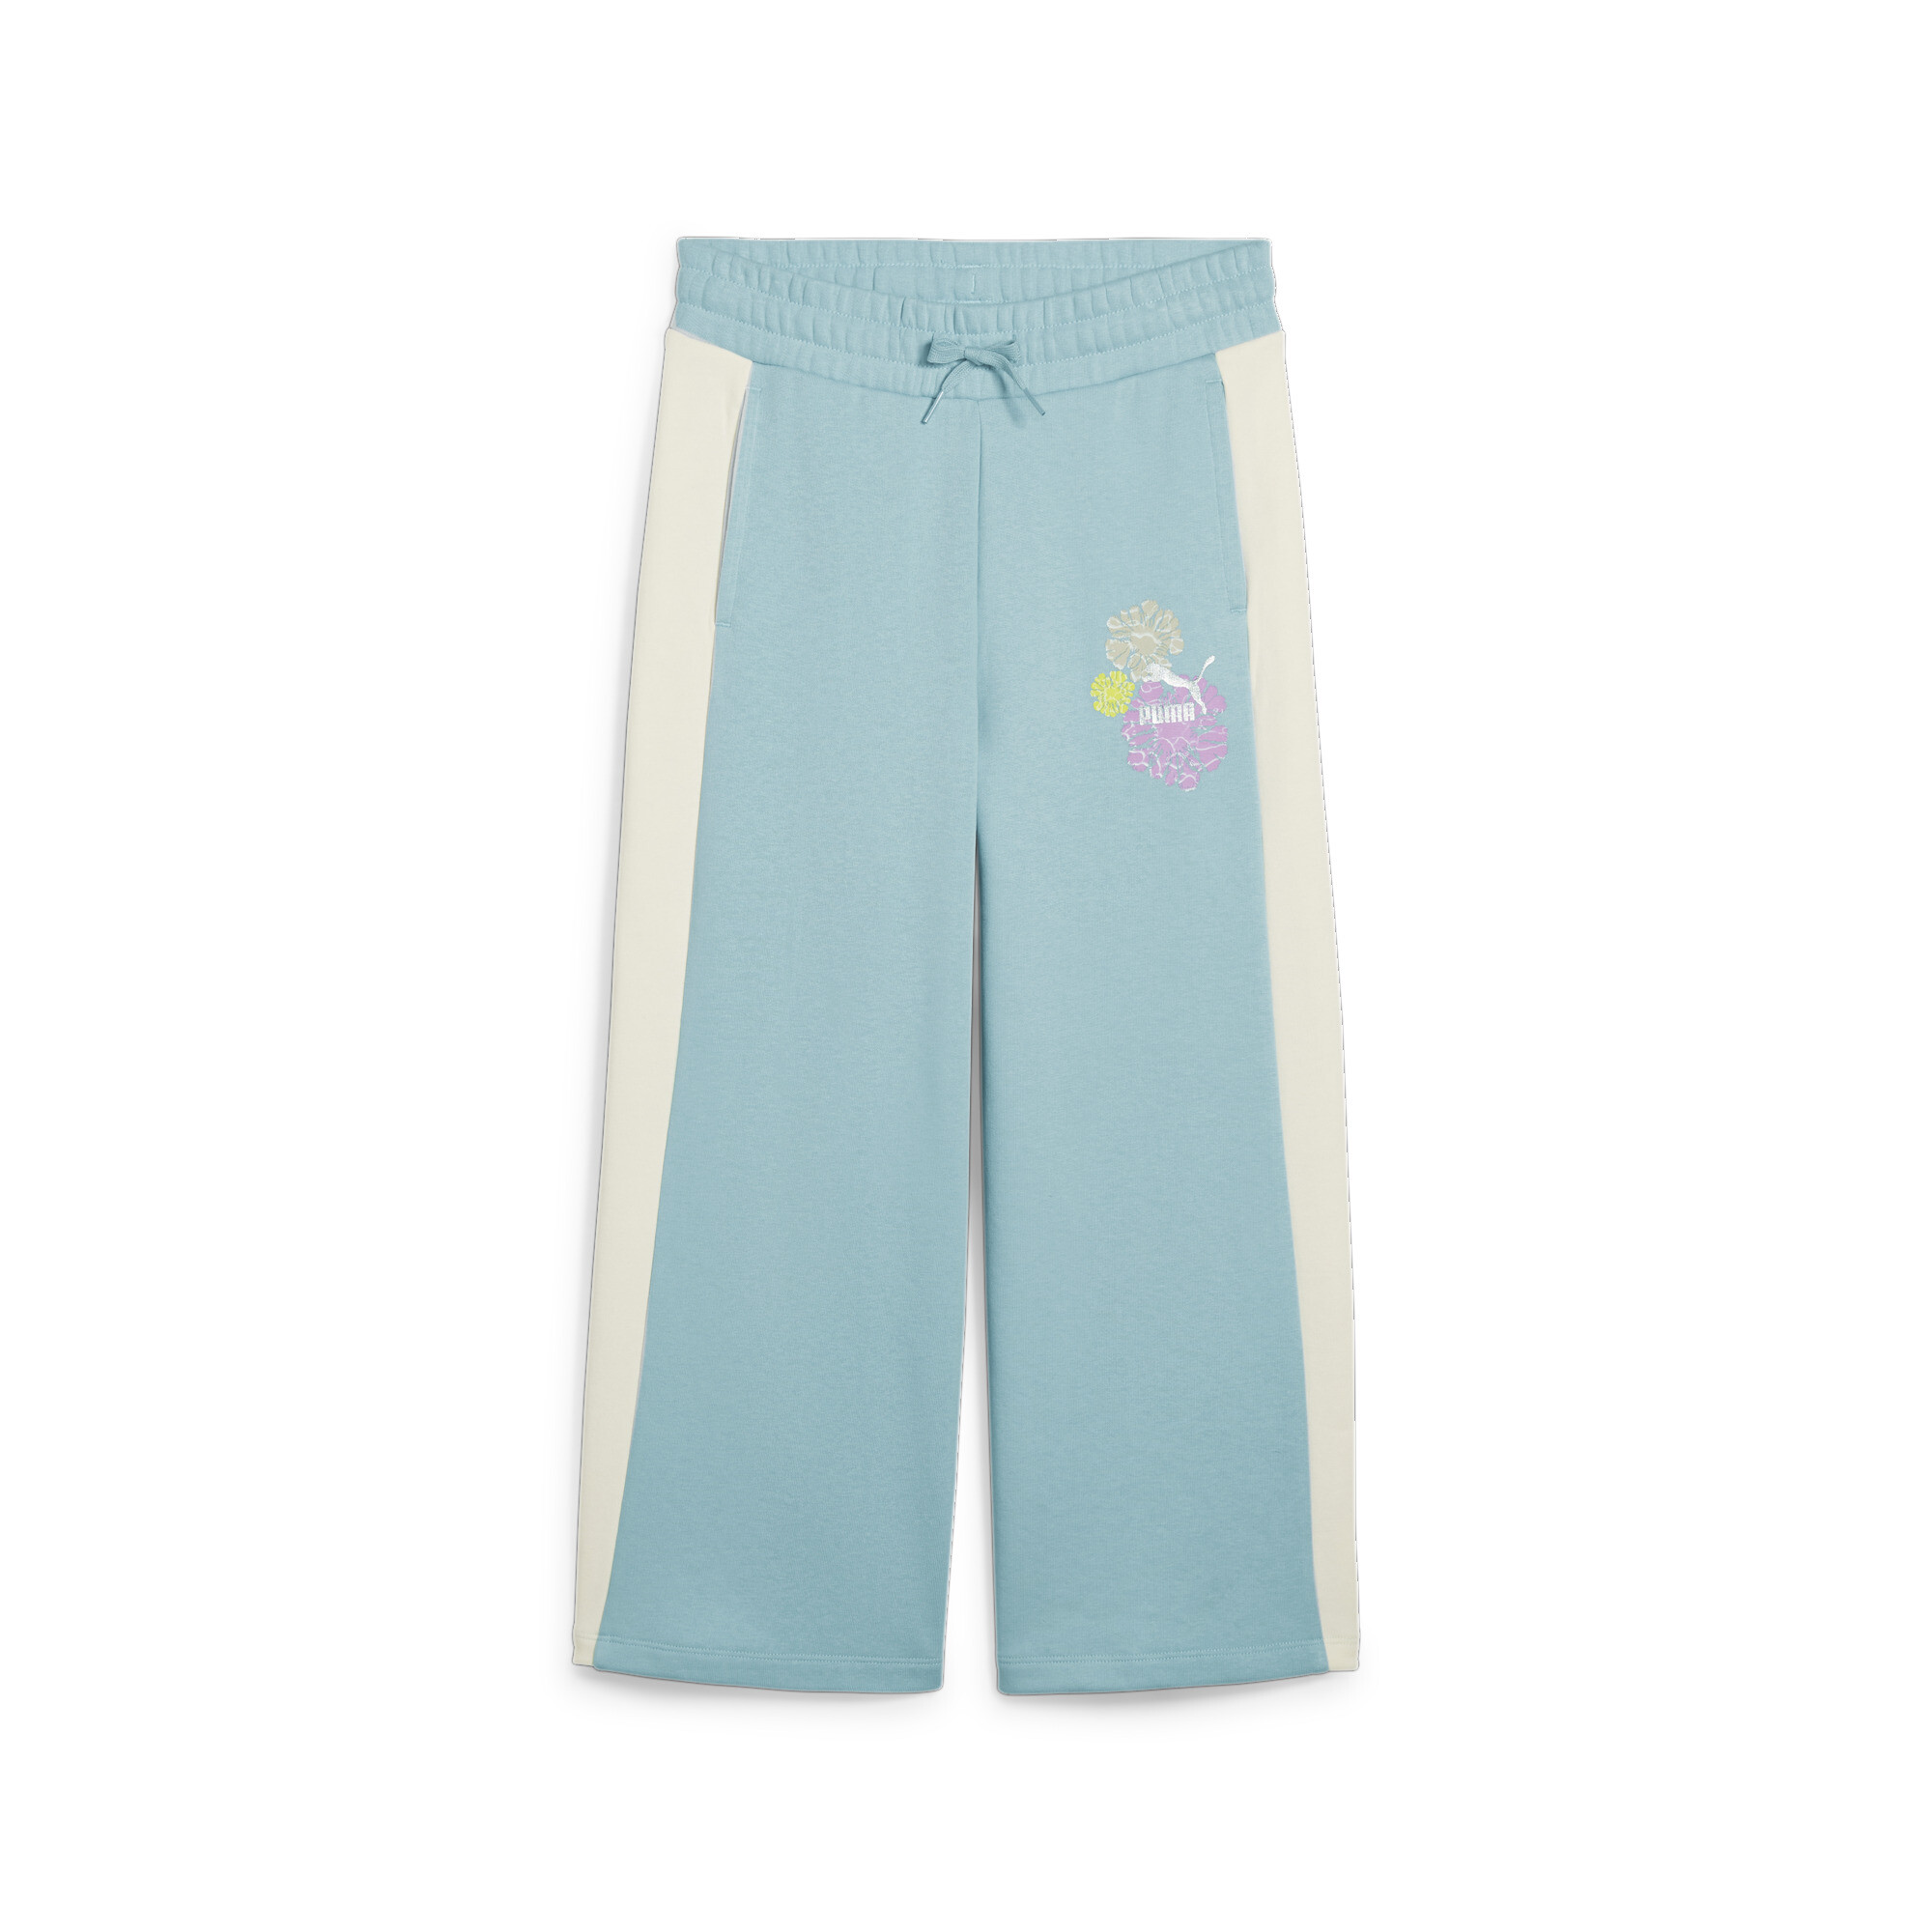 PUMA T7 SNFLR Girls' 7/8 Sweatpants In Blue, Size 9-10 Youth